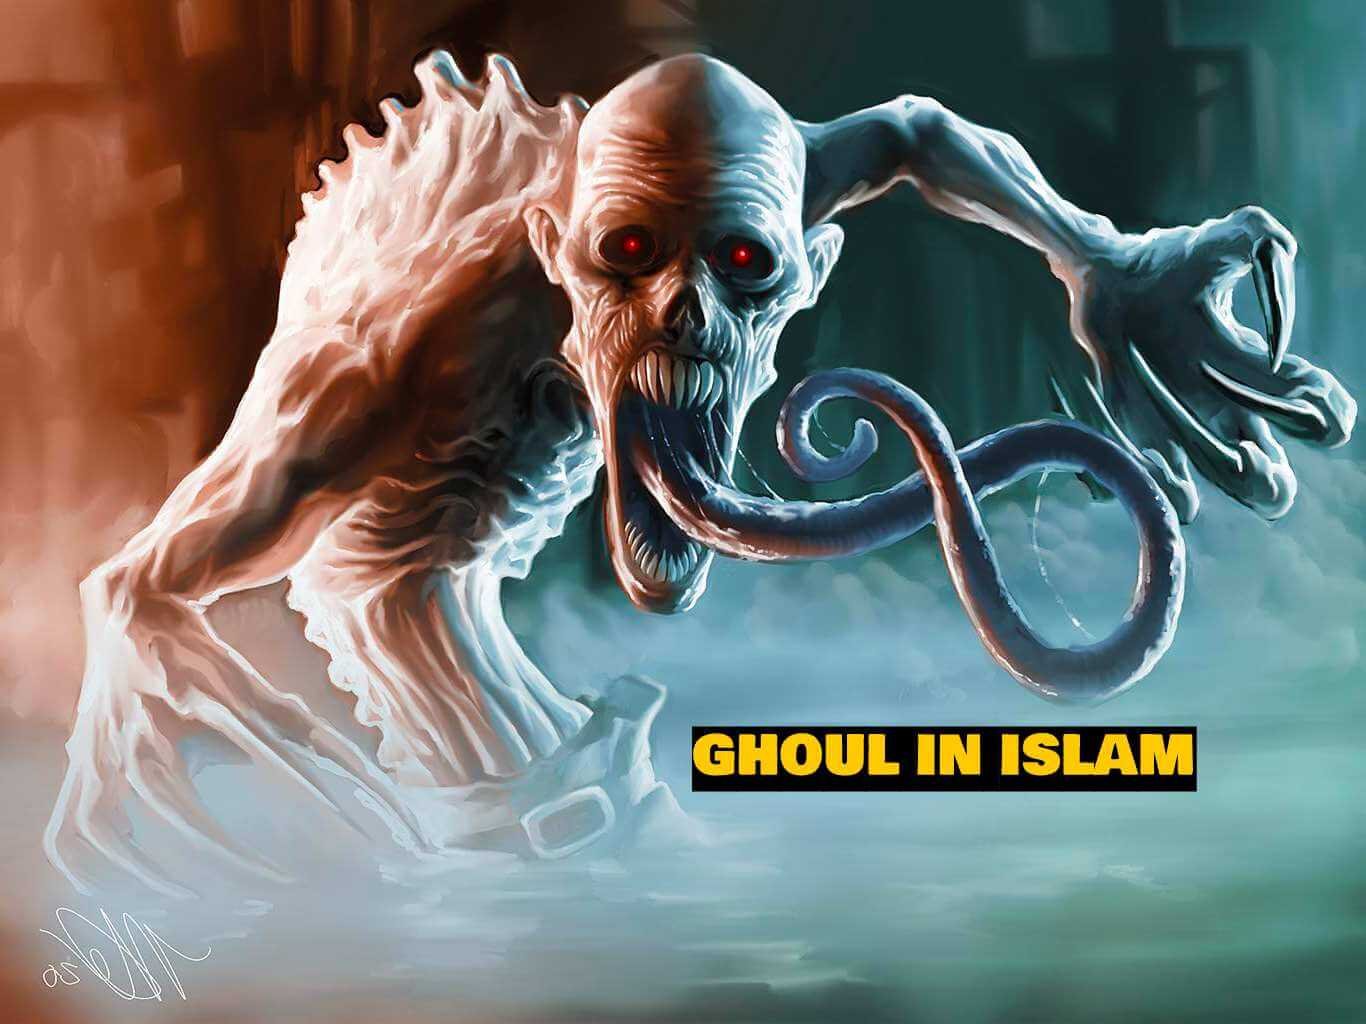 Ghoul in Islam? A Real Strange Creature That Hunts Human Flesh in Deserts and Graveyards!